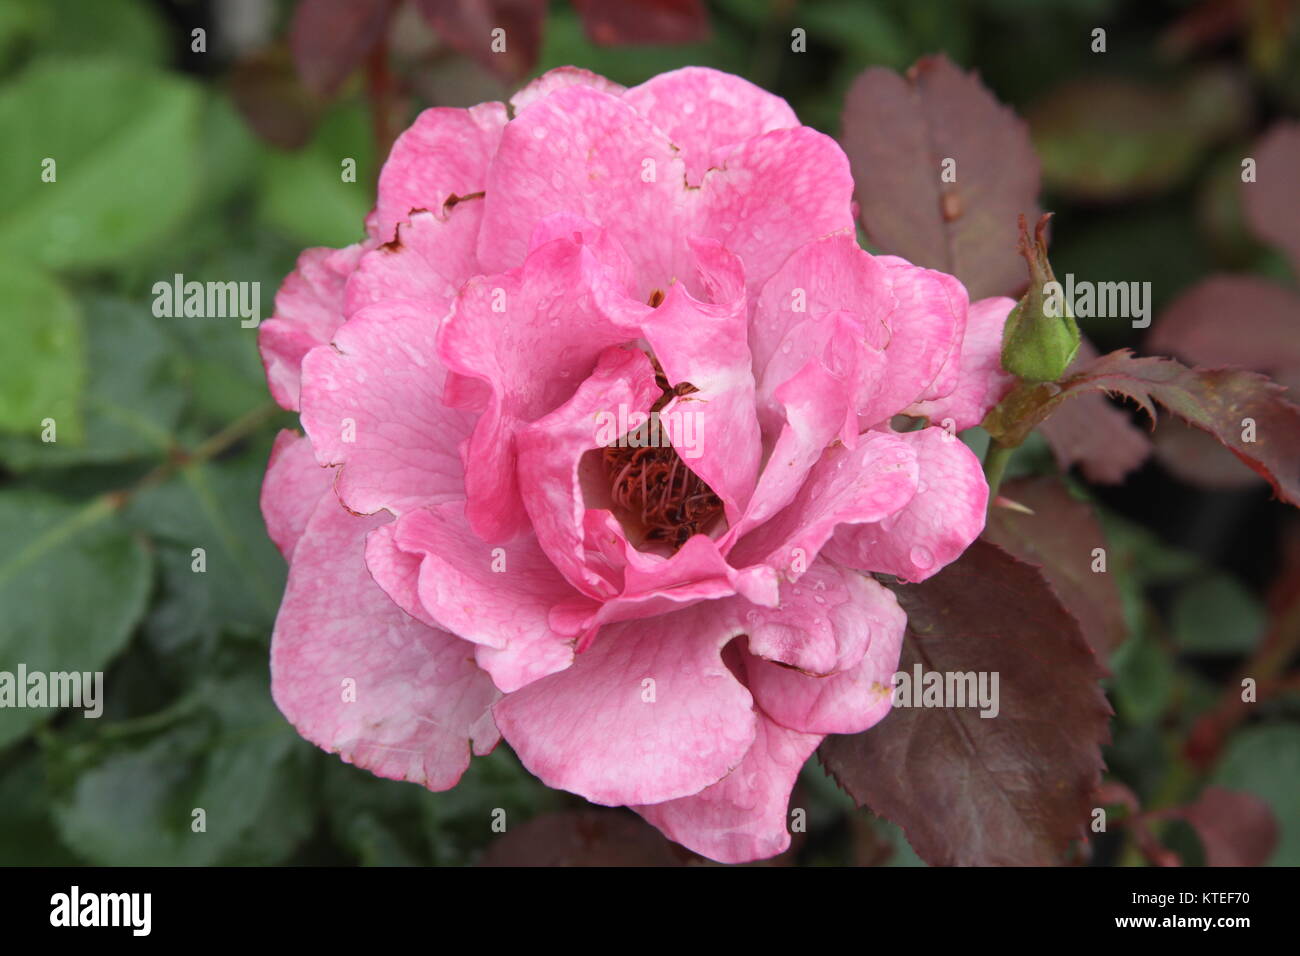 Pink Knockout Rose with Water Droplets Stock Photo